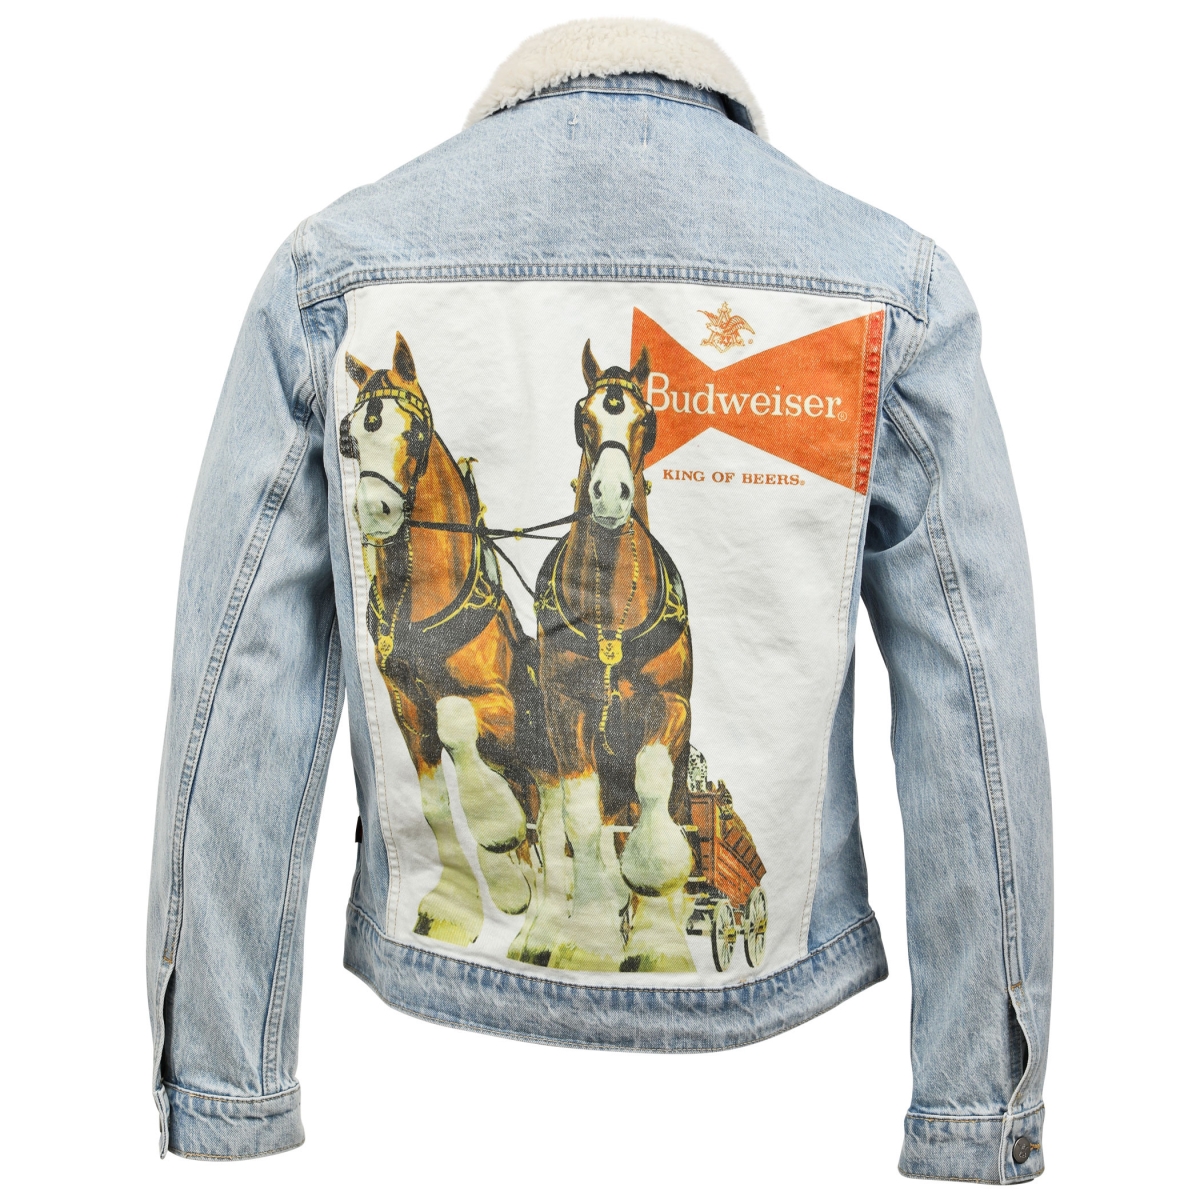 Anheuser-Busch Sherpa Trucker Jacket with Clydesdale Print, Extra Large -  Budweiser, BU338332